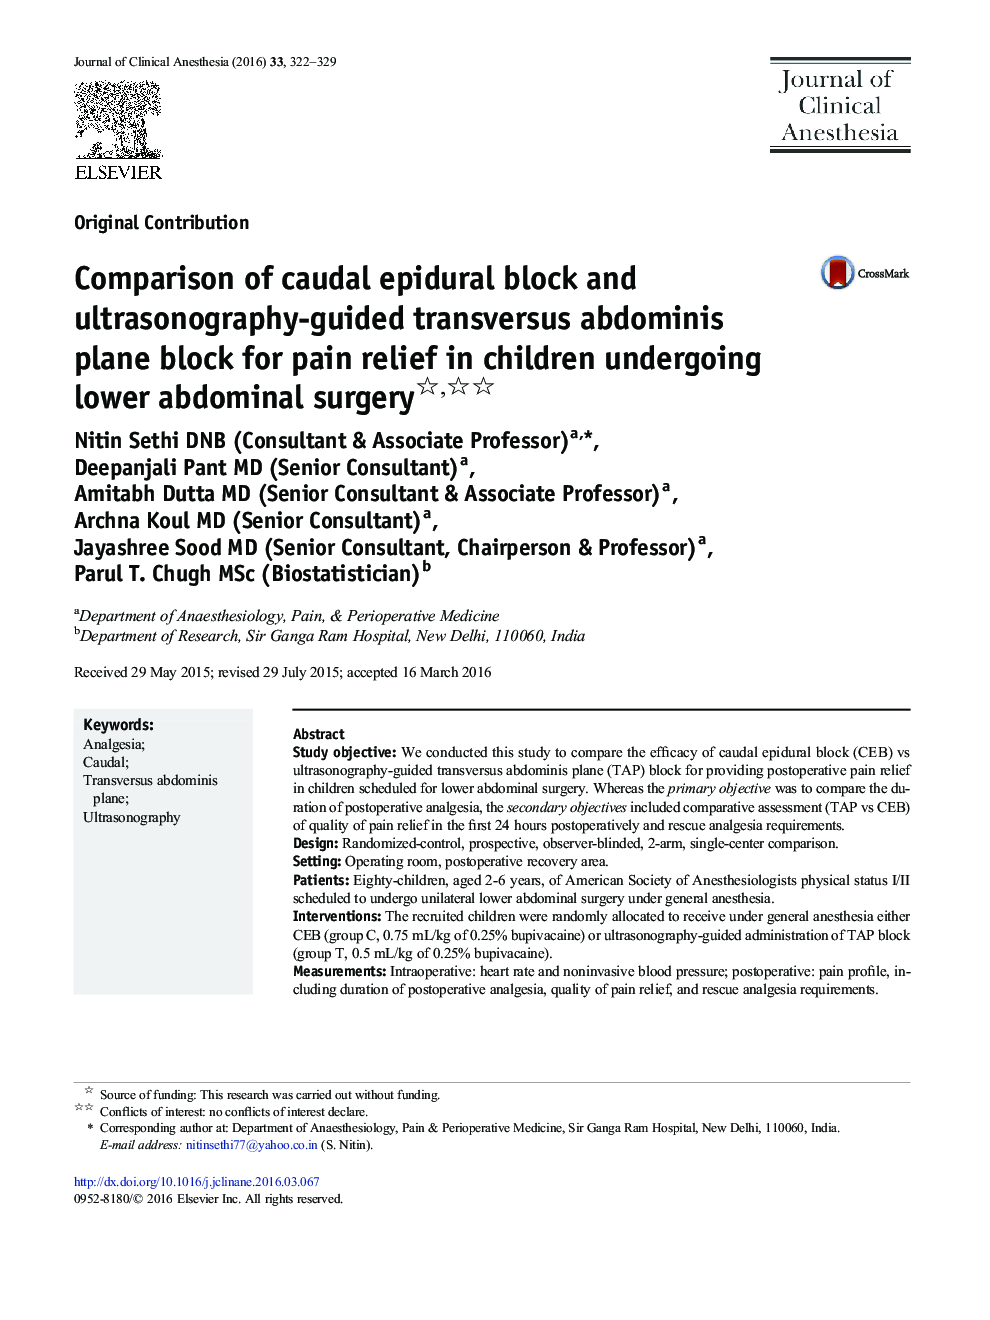 Comparison of caudal epidural block and ultrasonography-guided transversus abdominis plane block for pain relief in children undergoing lower abdominal surgery 